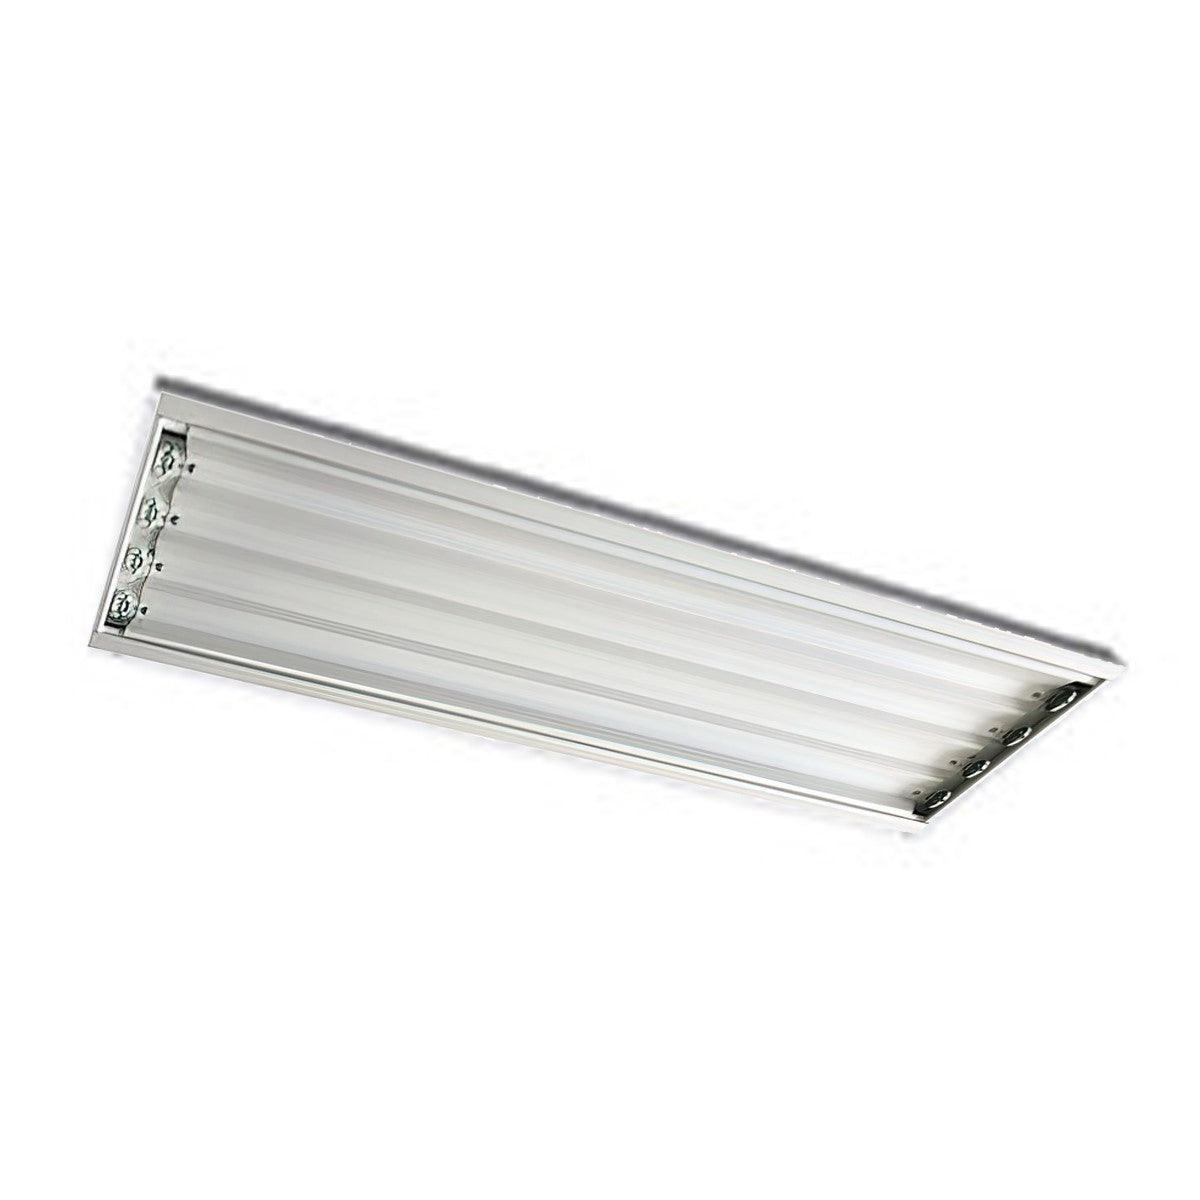 4ft LED Ready High Bay, 4 lamp Double End Wiring, T8 Bulbs Not Included